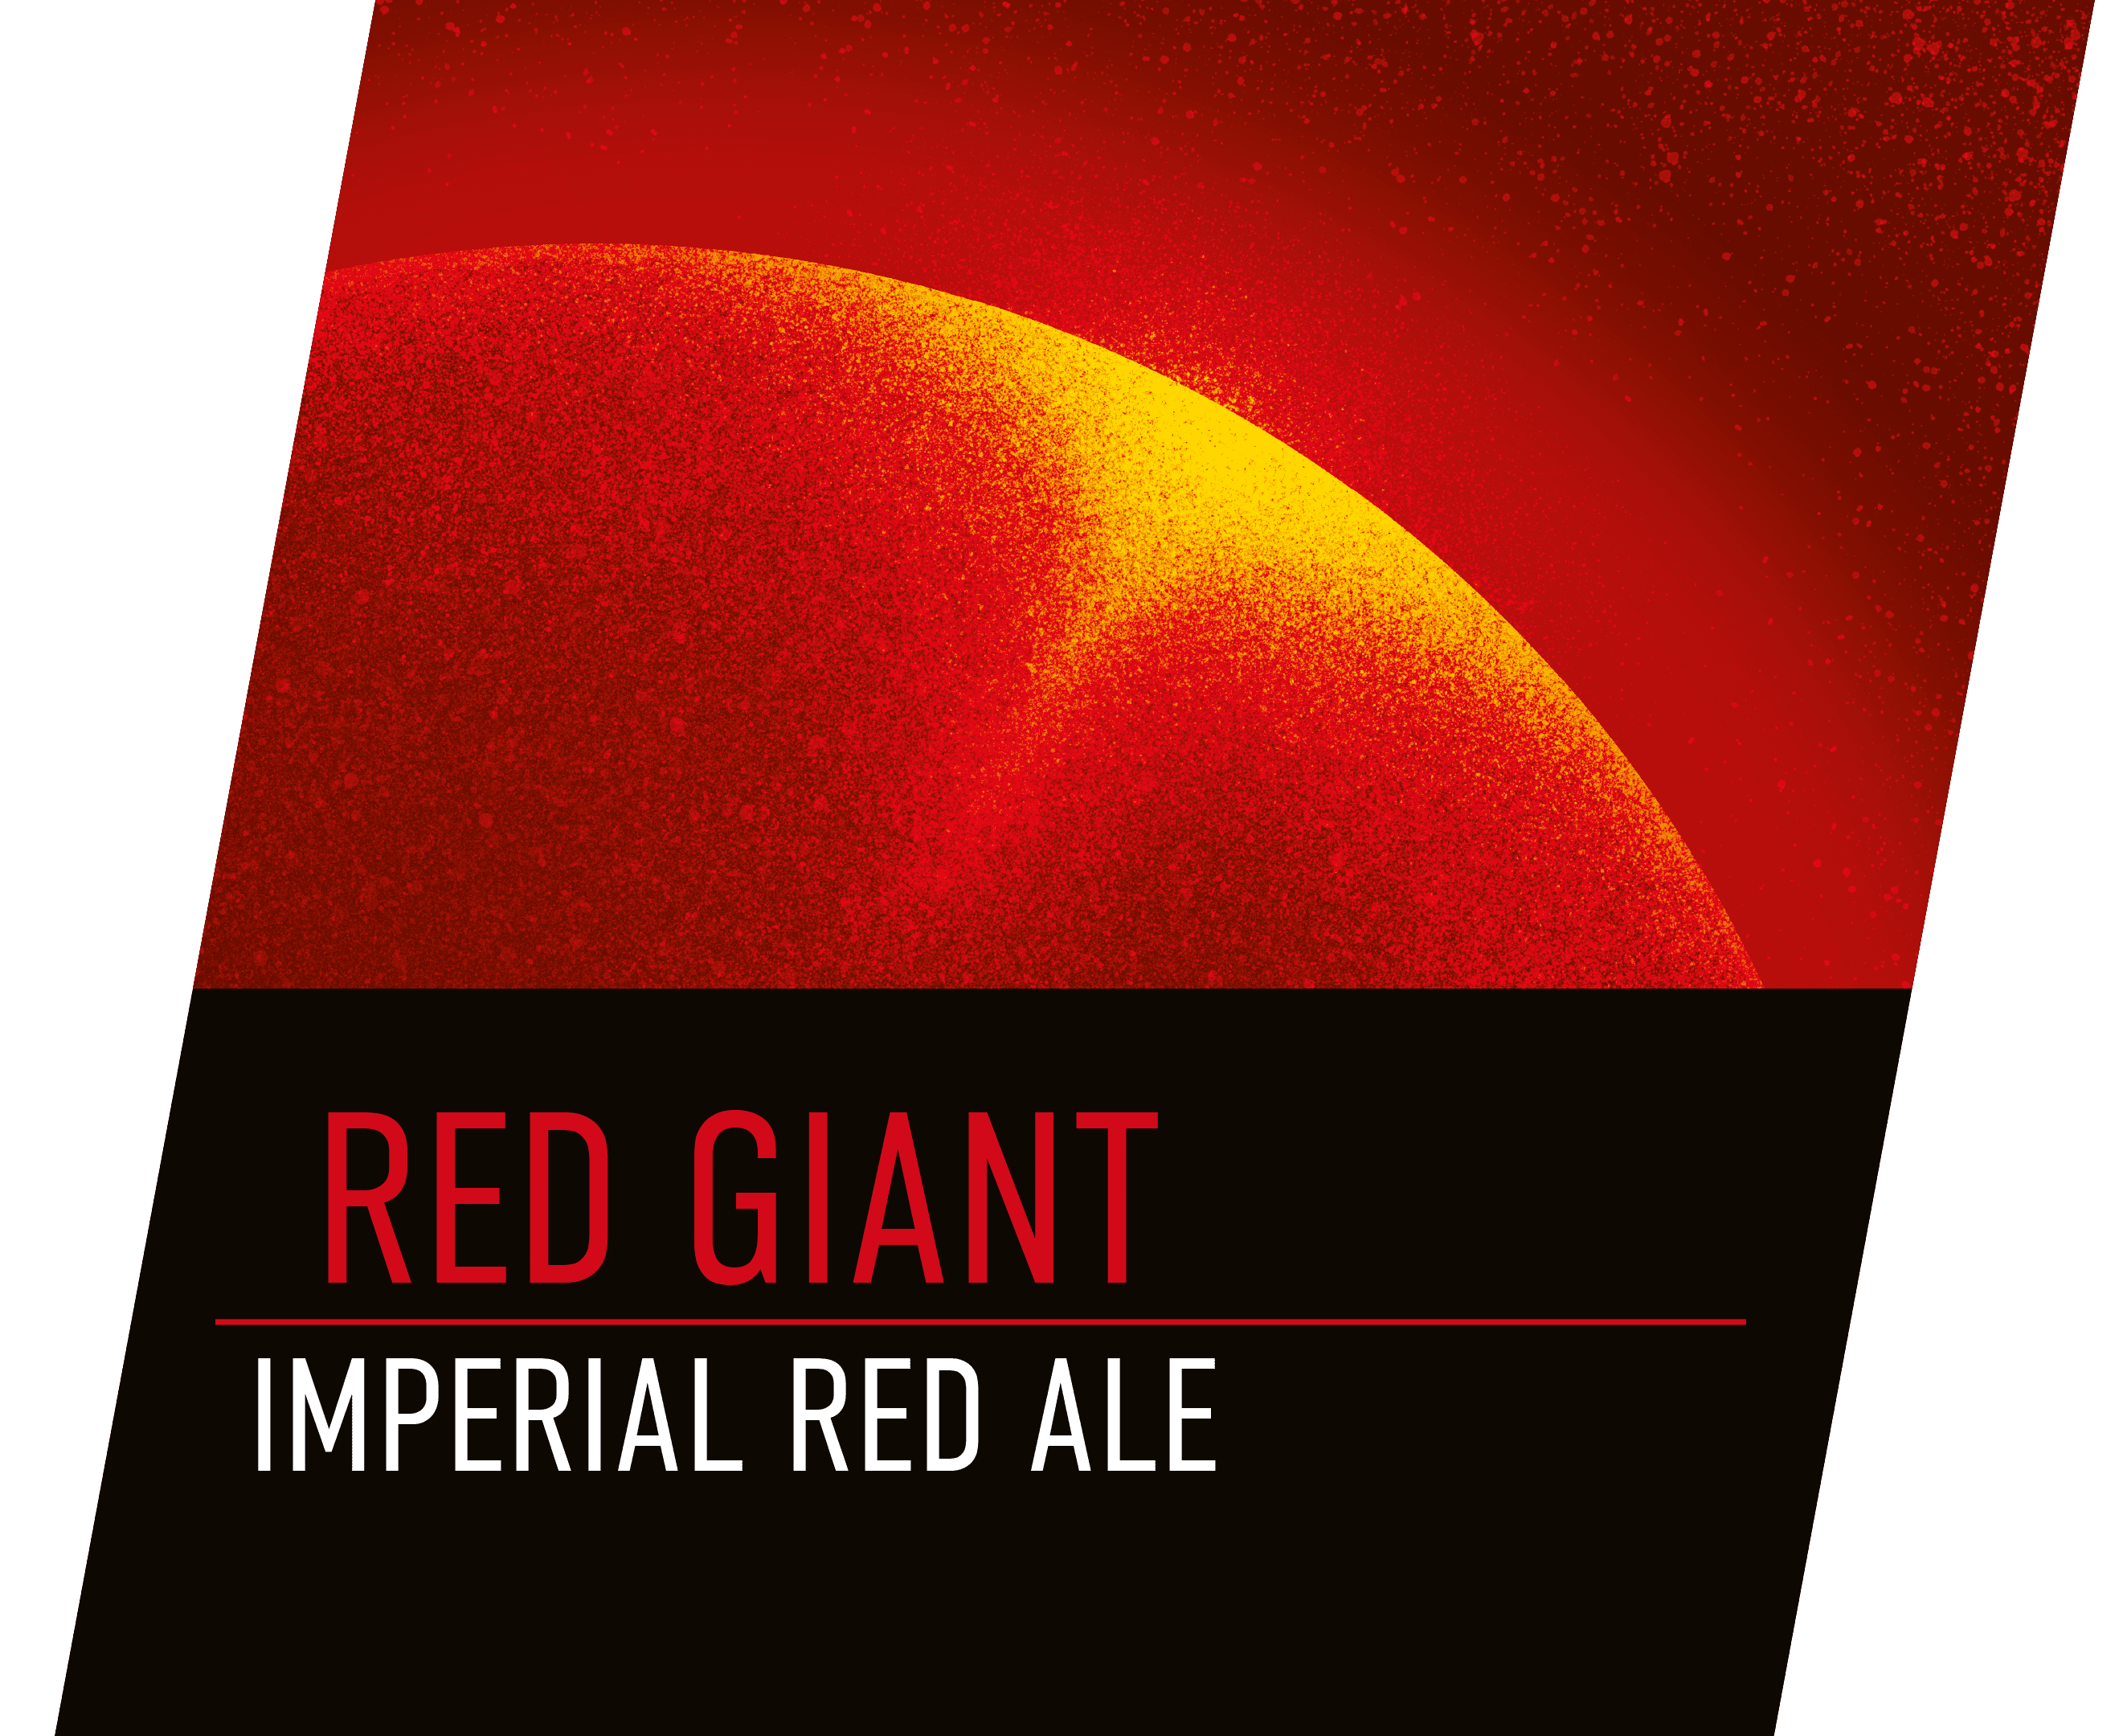 Gravity Brewing Budapest Red Giant Imperial Red Ale